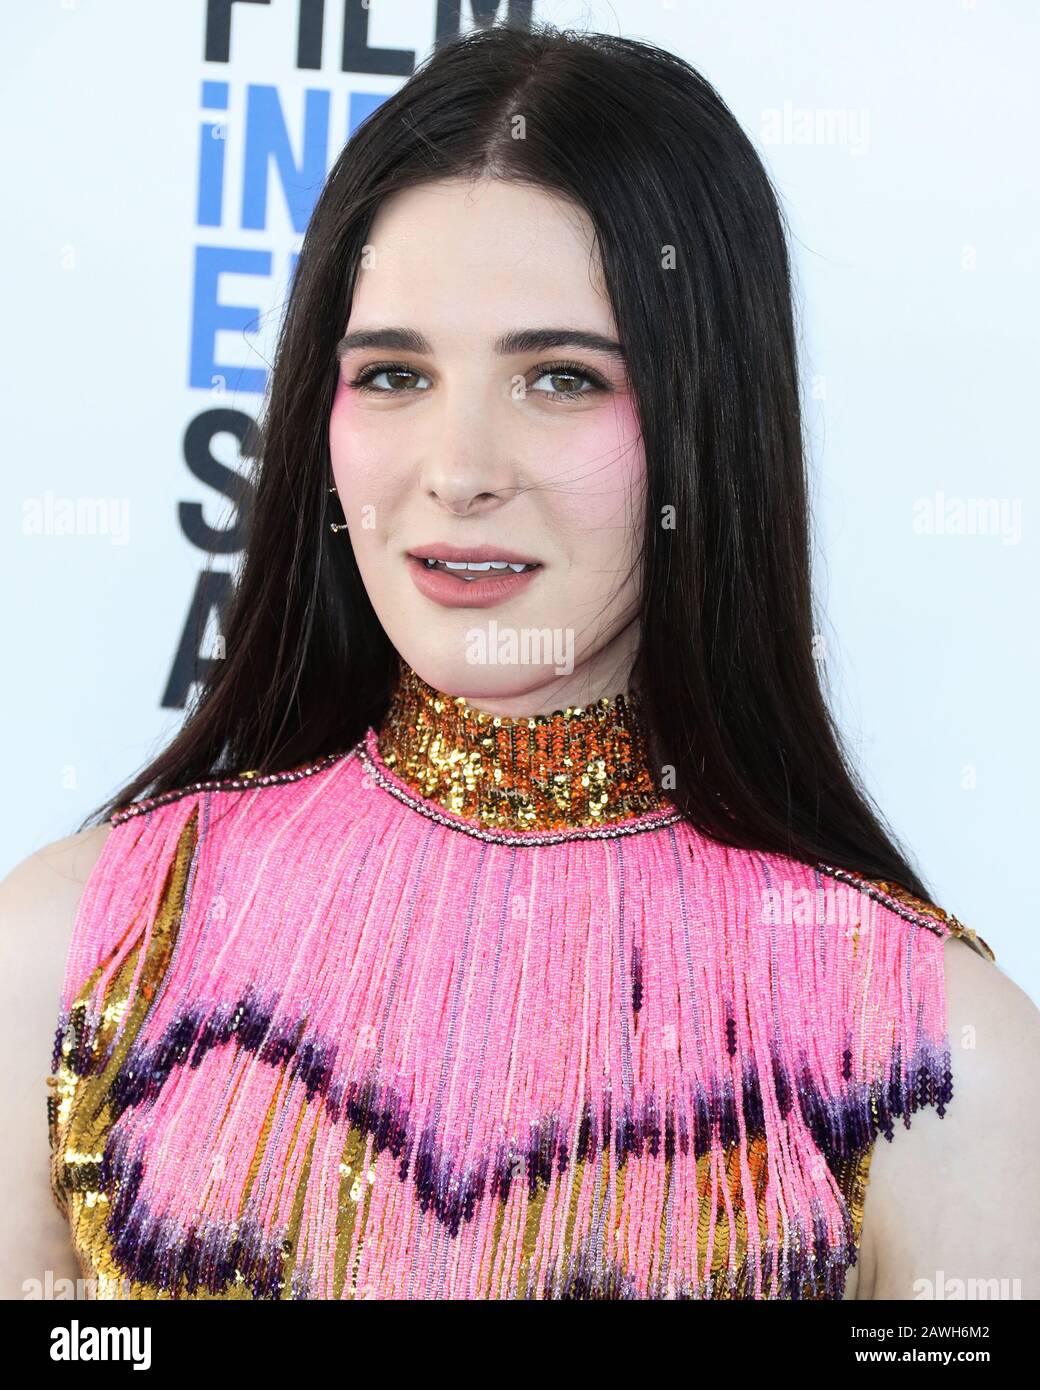 SANTA MONICA, LOS ANGELES, CALIFORNIA, USA - FEBRUARY 08: Hari Nef arrives at the 2020 Film Independent Spirit Awards held at the Santa Monica Beach on February 8, 2020 in Santa Monica, Los Angeles, California, United States. (Photo by Xavier Collin/Image Press Agency) Stock Photo